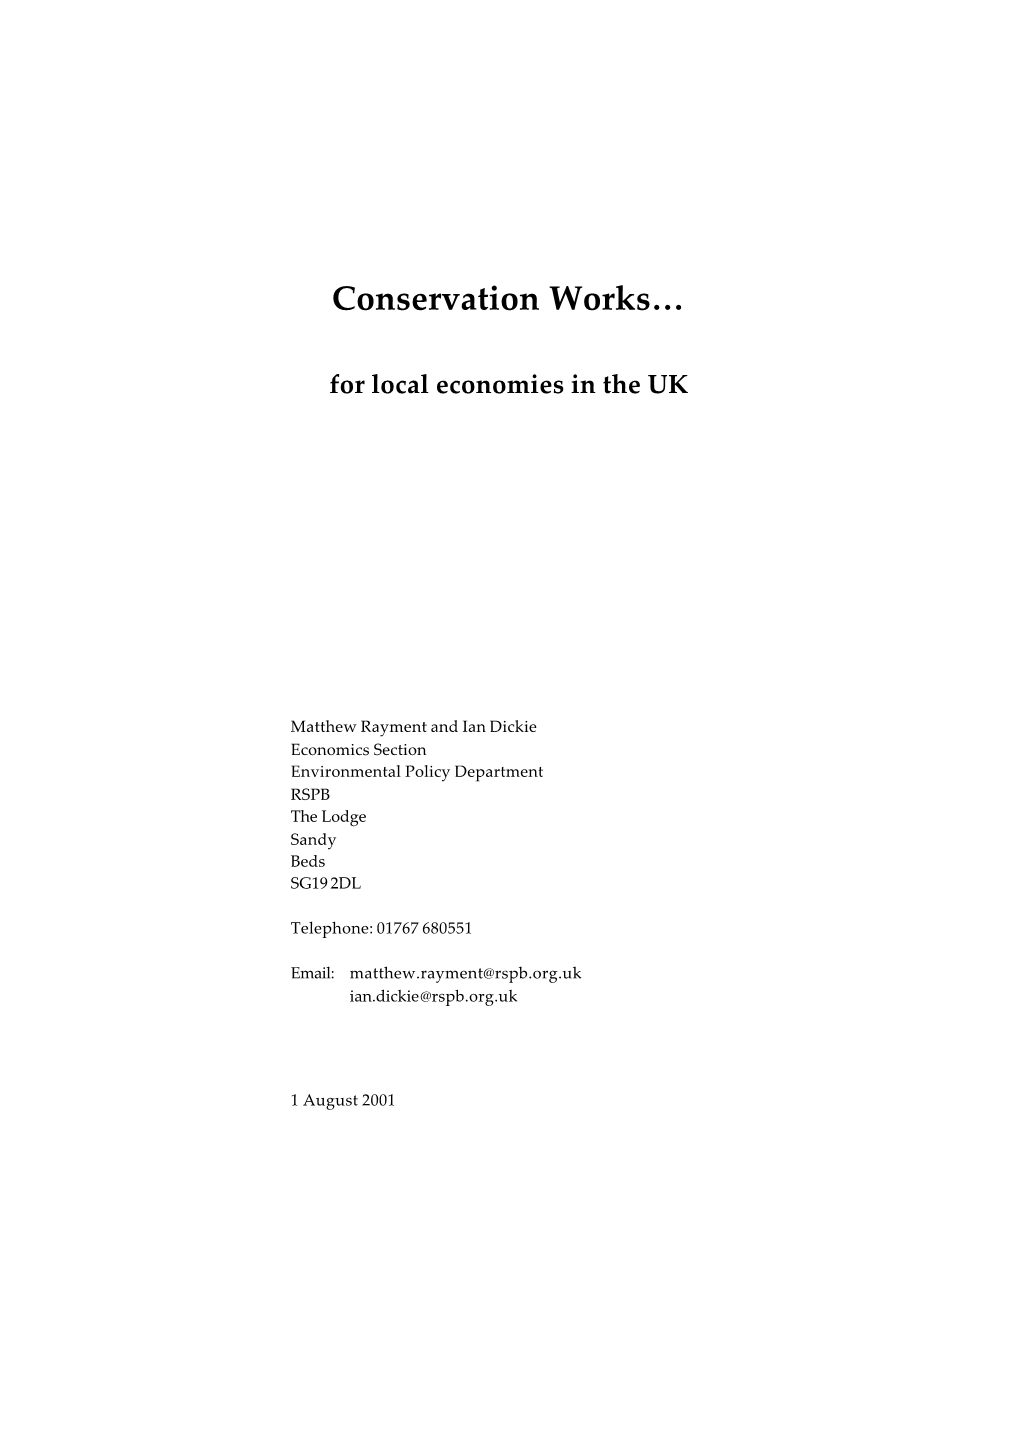 Conservation Works...For Local Economies in the UK